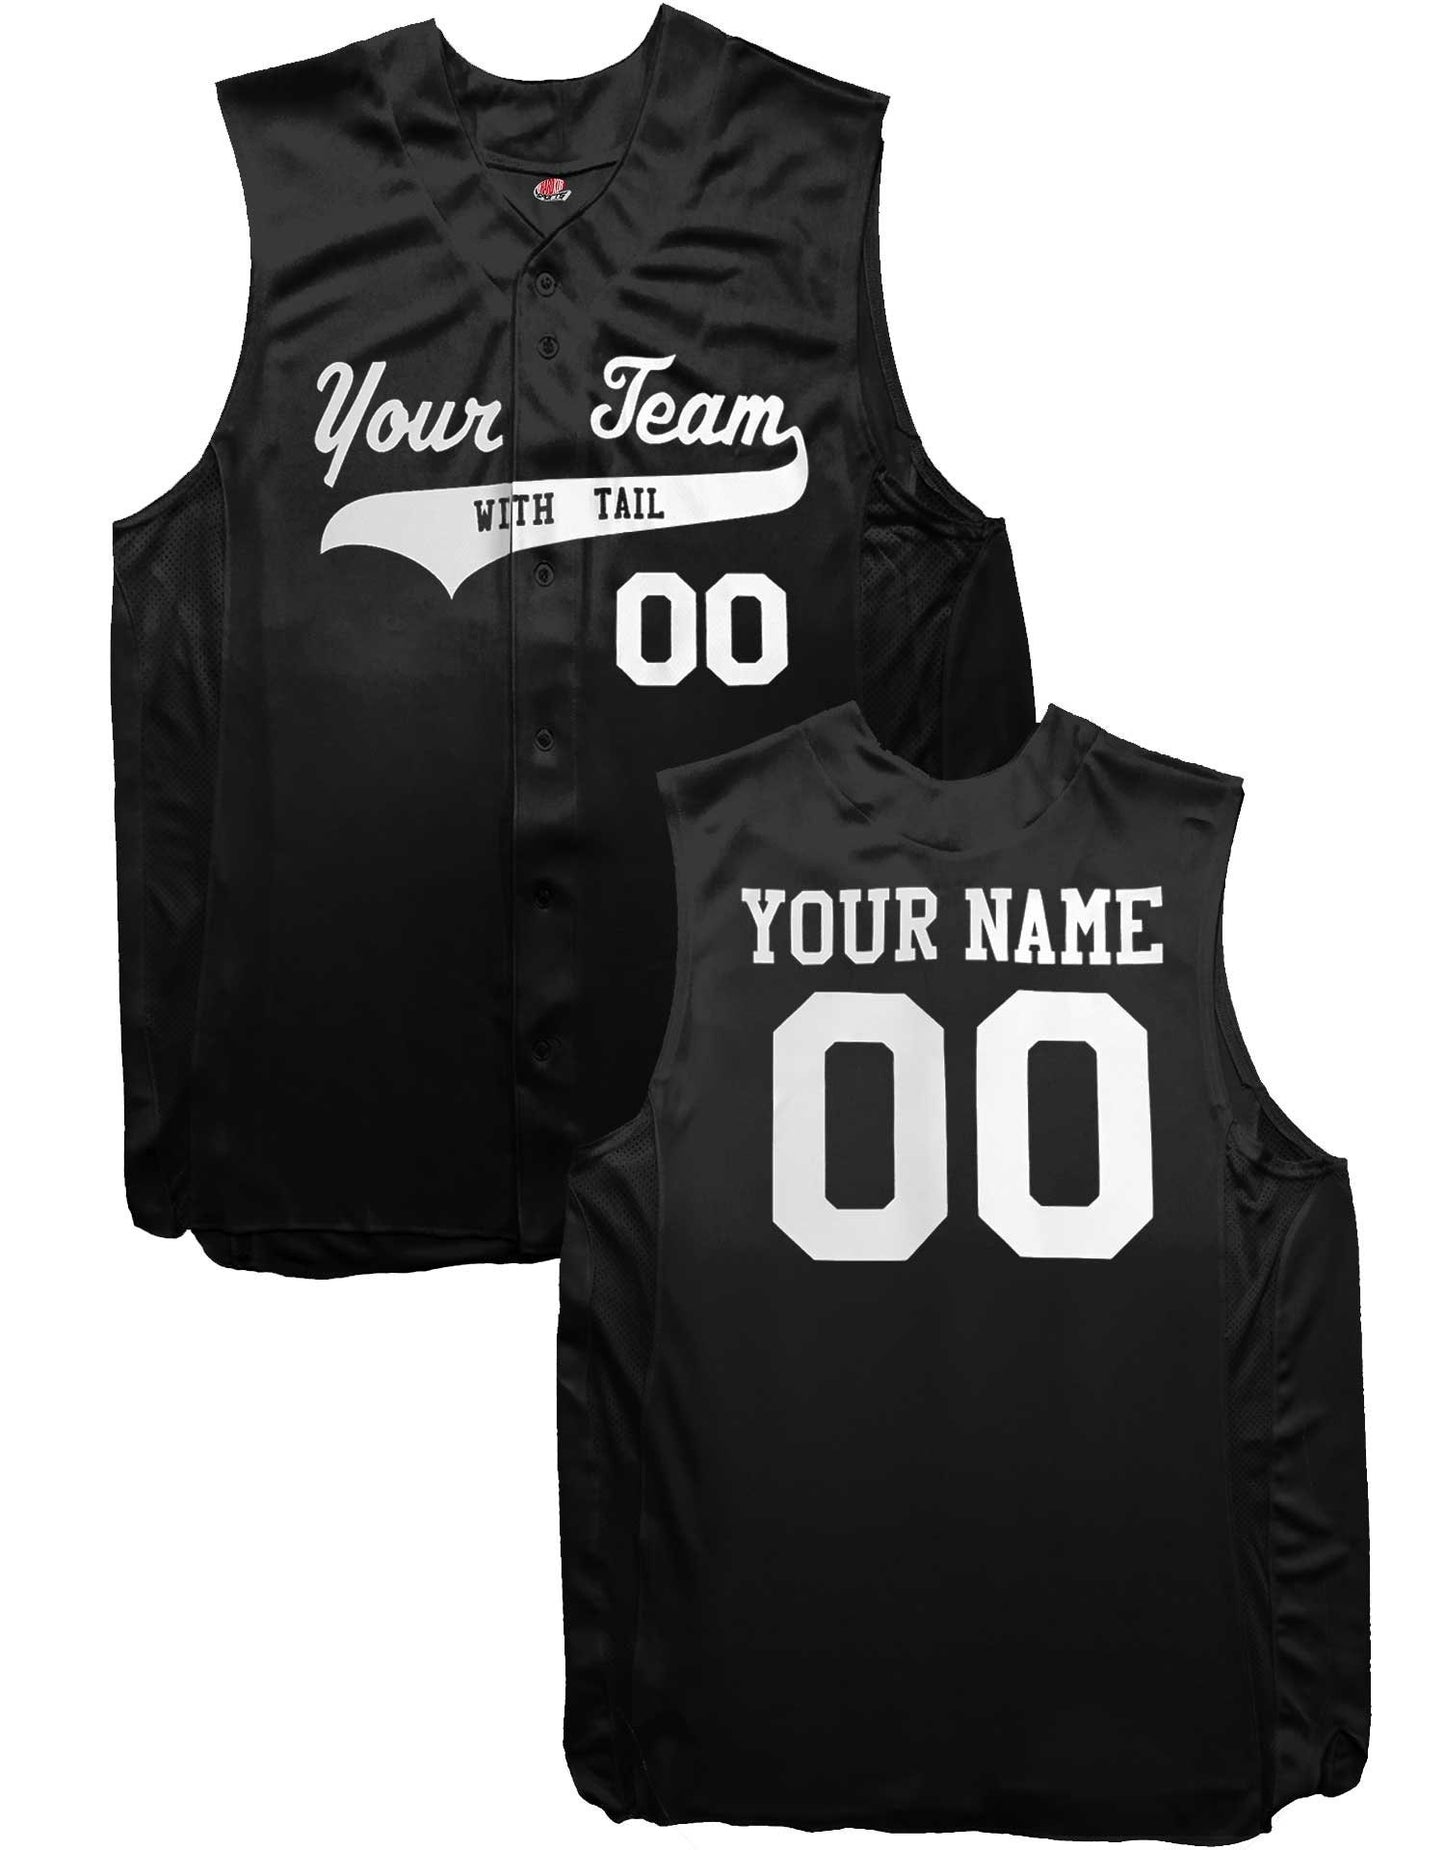 Solid Color 6 Button Double Knit Sleeveless Baseball Jersey| Custom Jersey with Team, Player, Numbers Black, White, Natural, Graphite, Grey